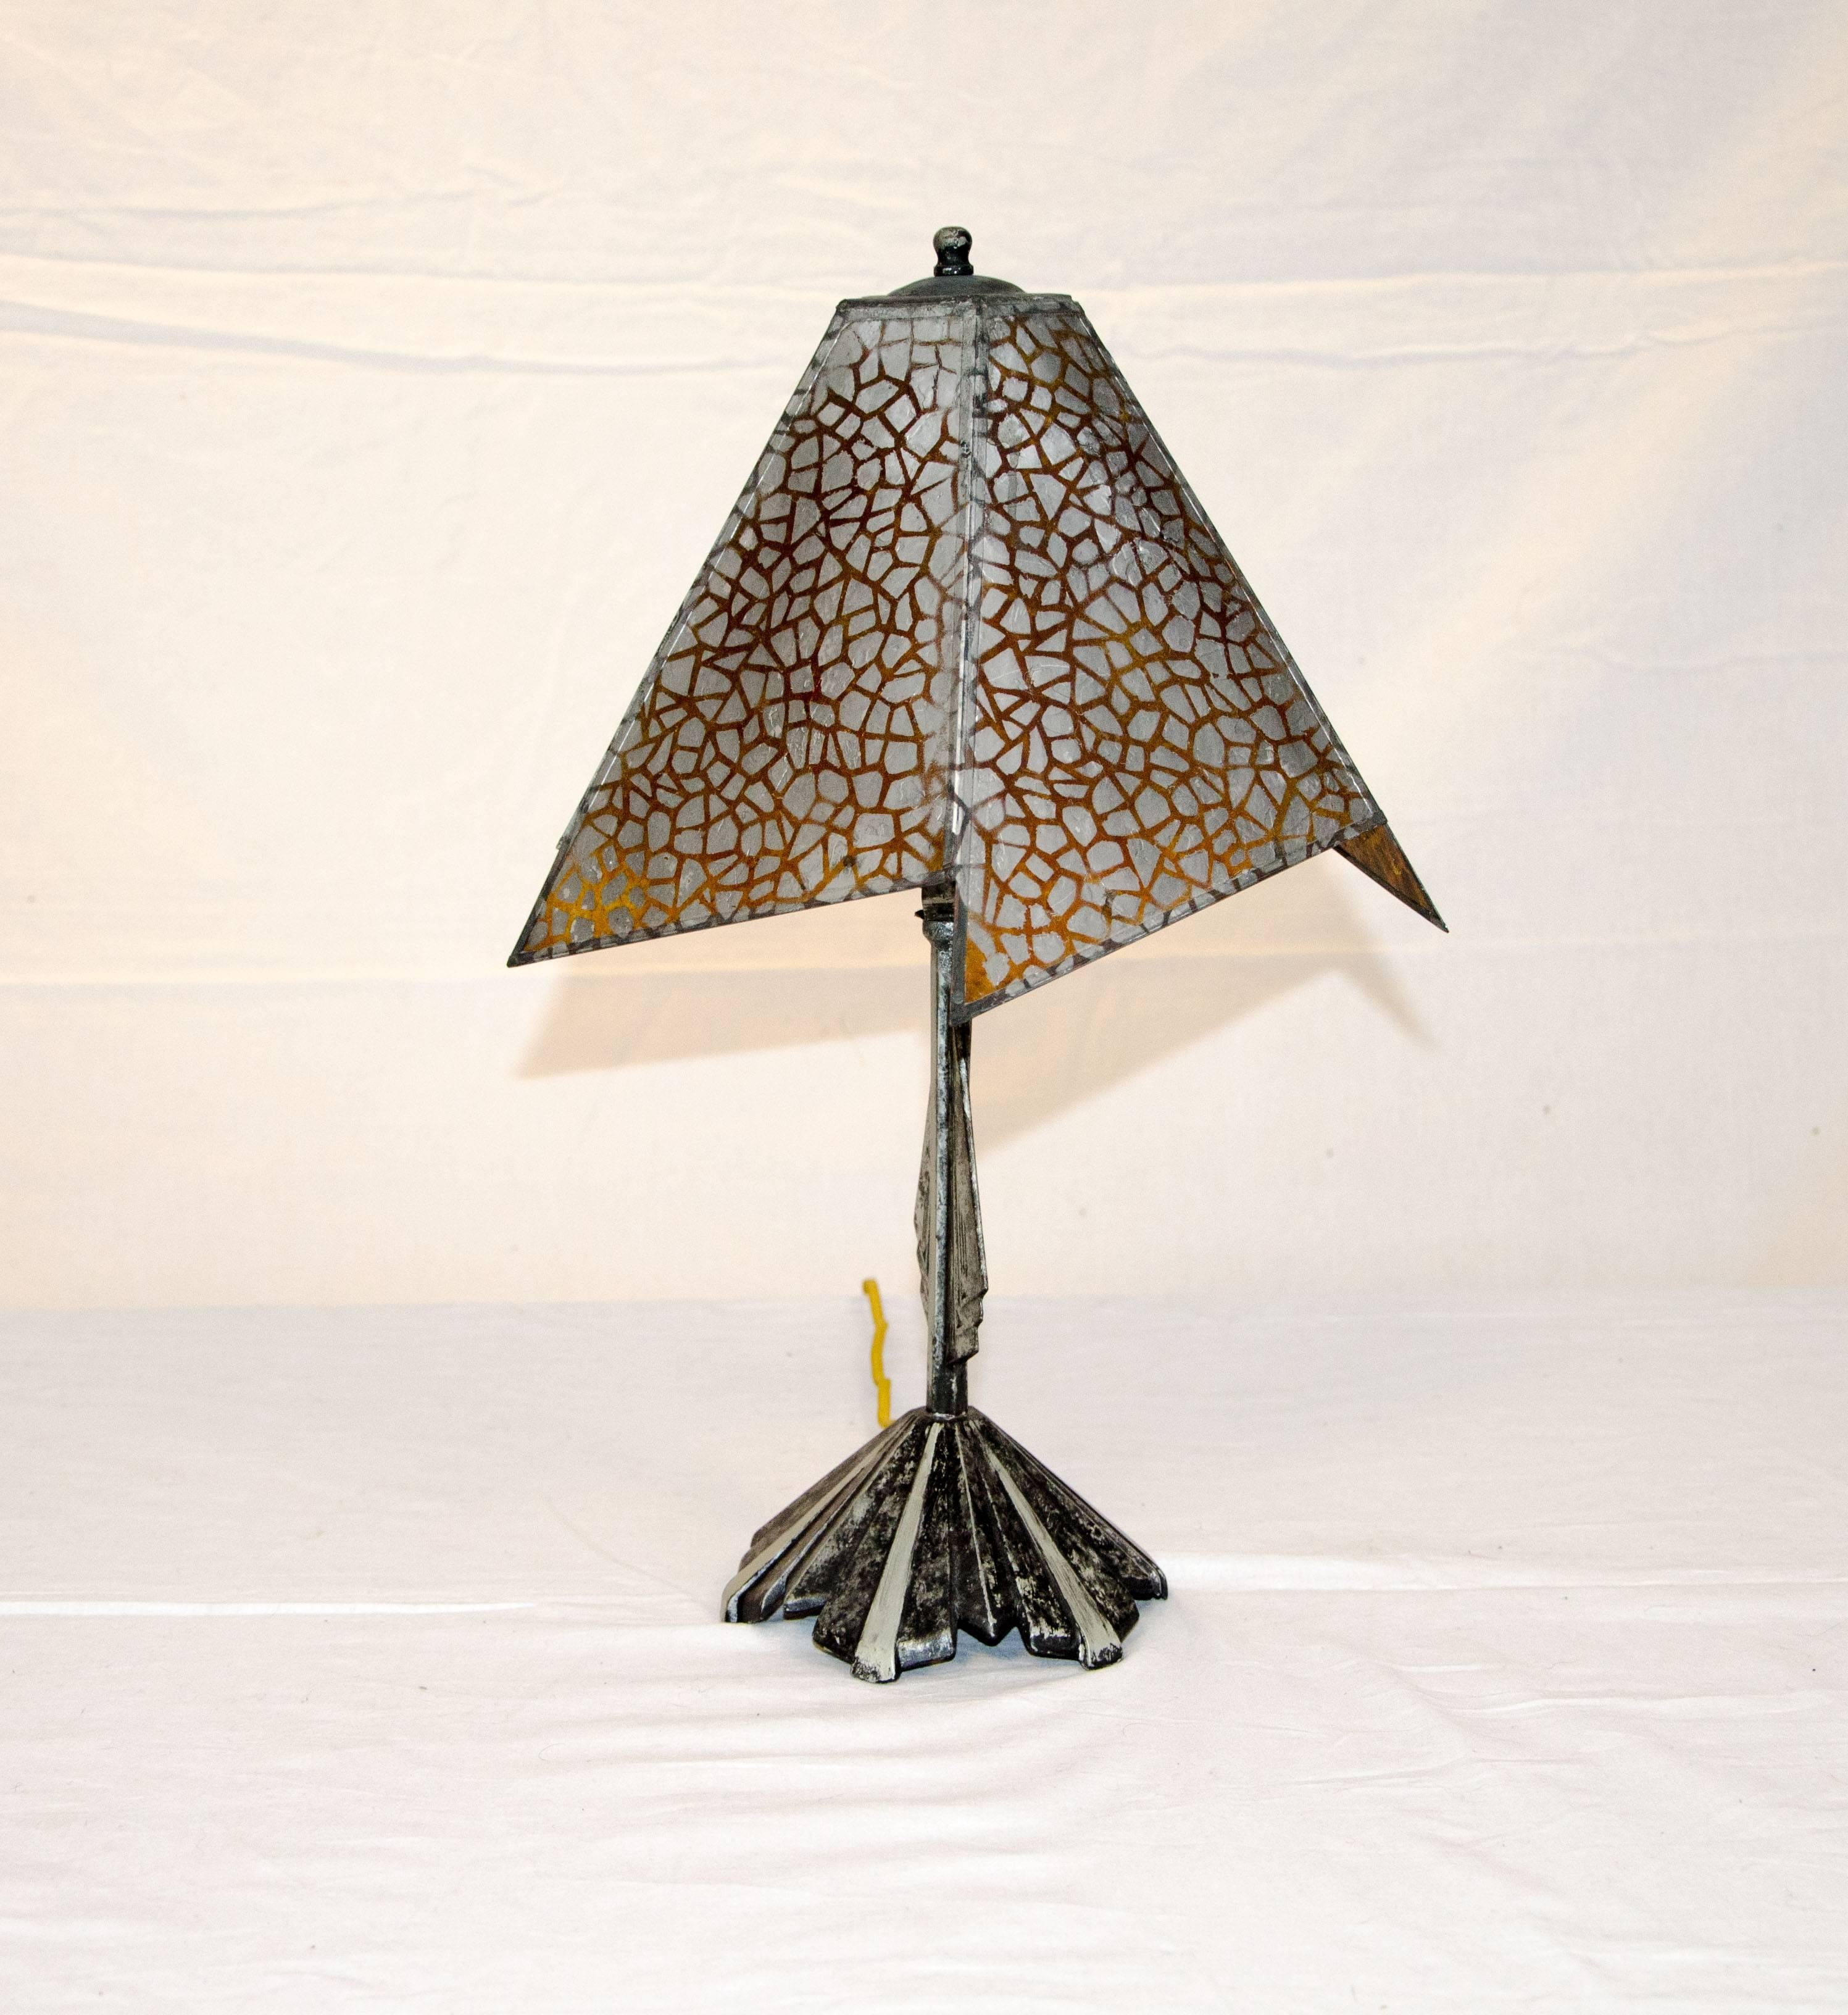 Very nice small accent Art Deco lamp. The 9' tall 3